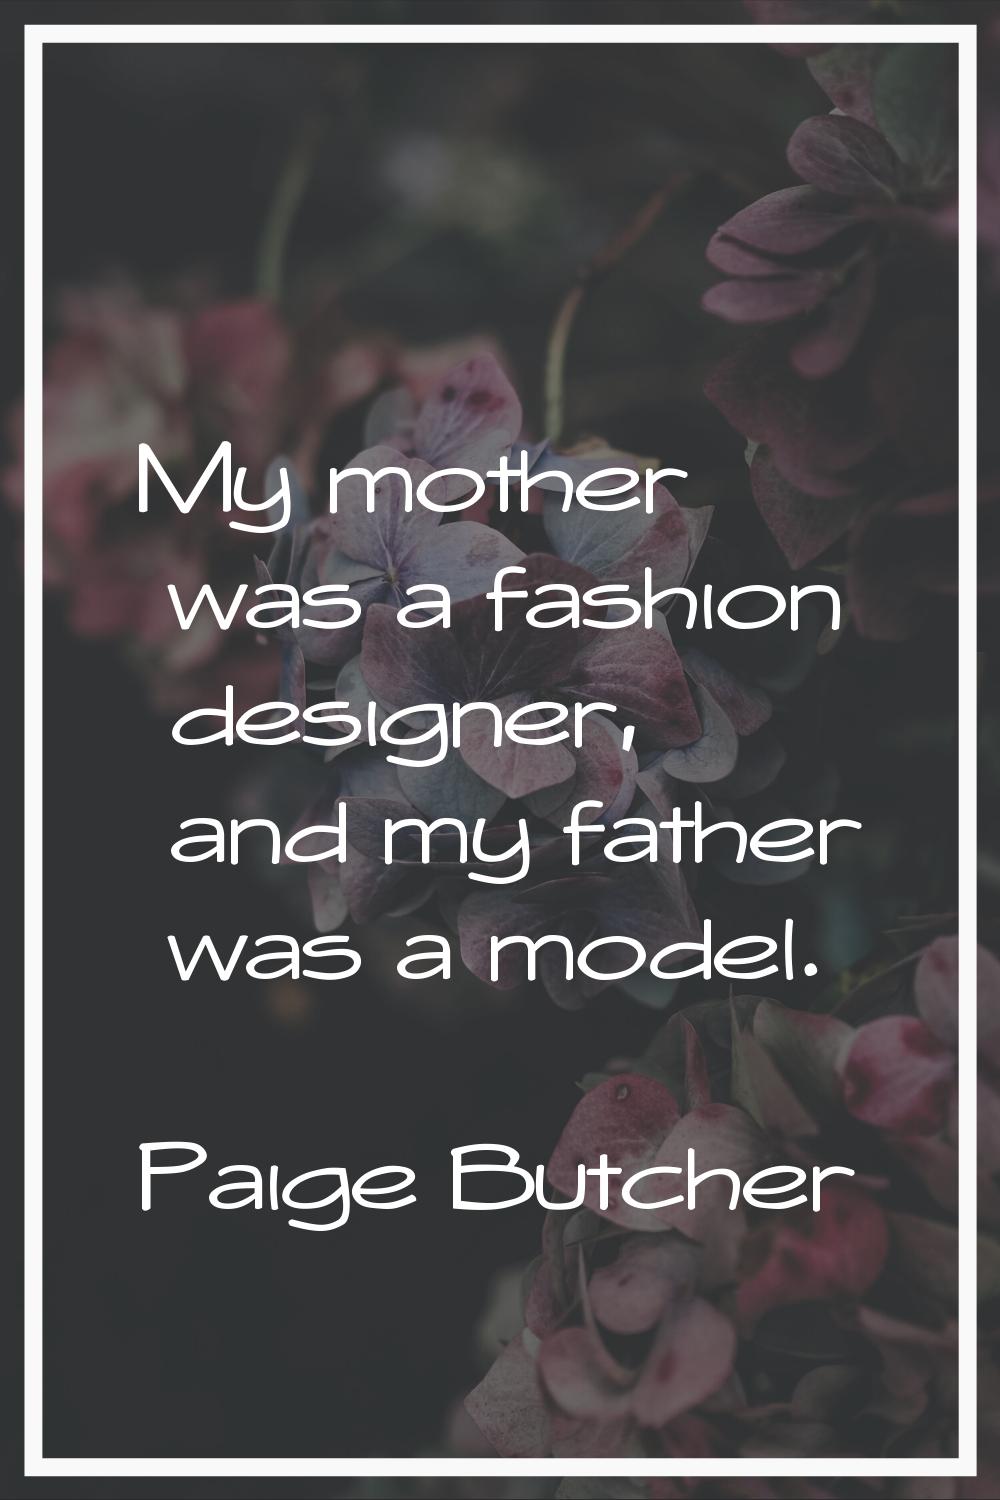 My mother was a fashion designer, and my father was a model.